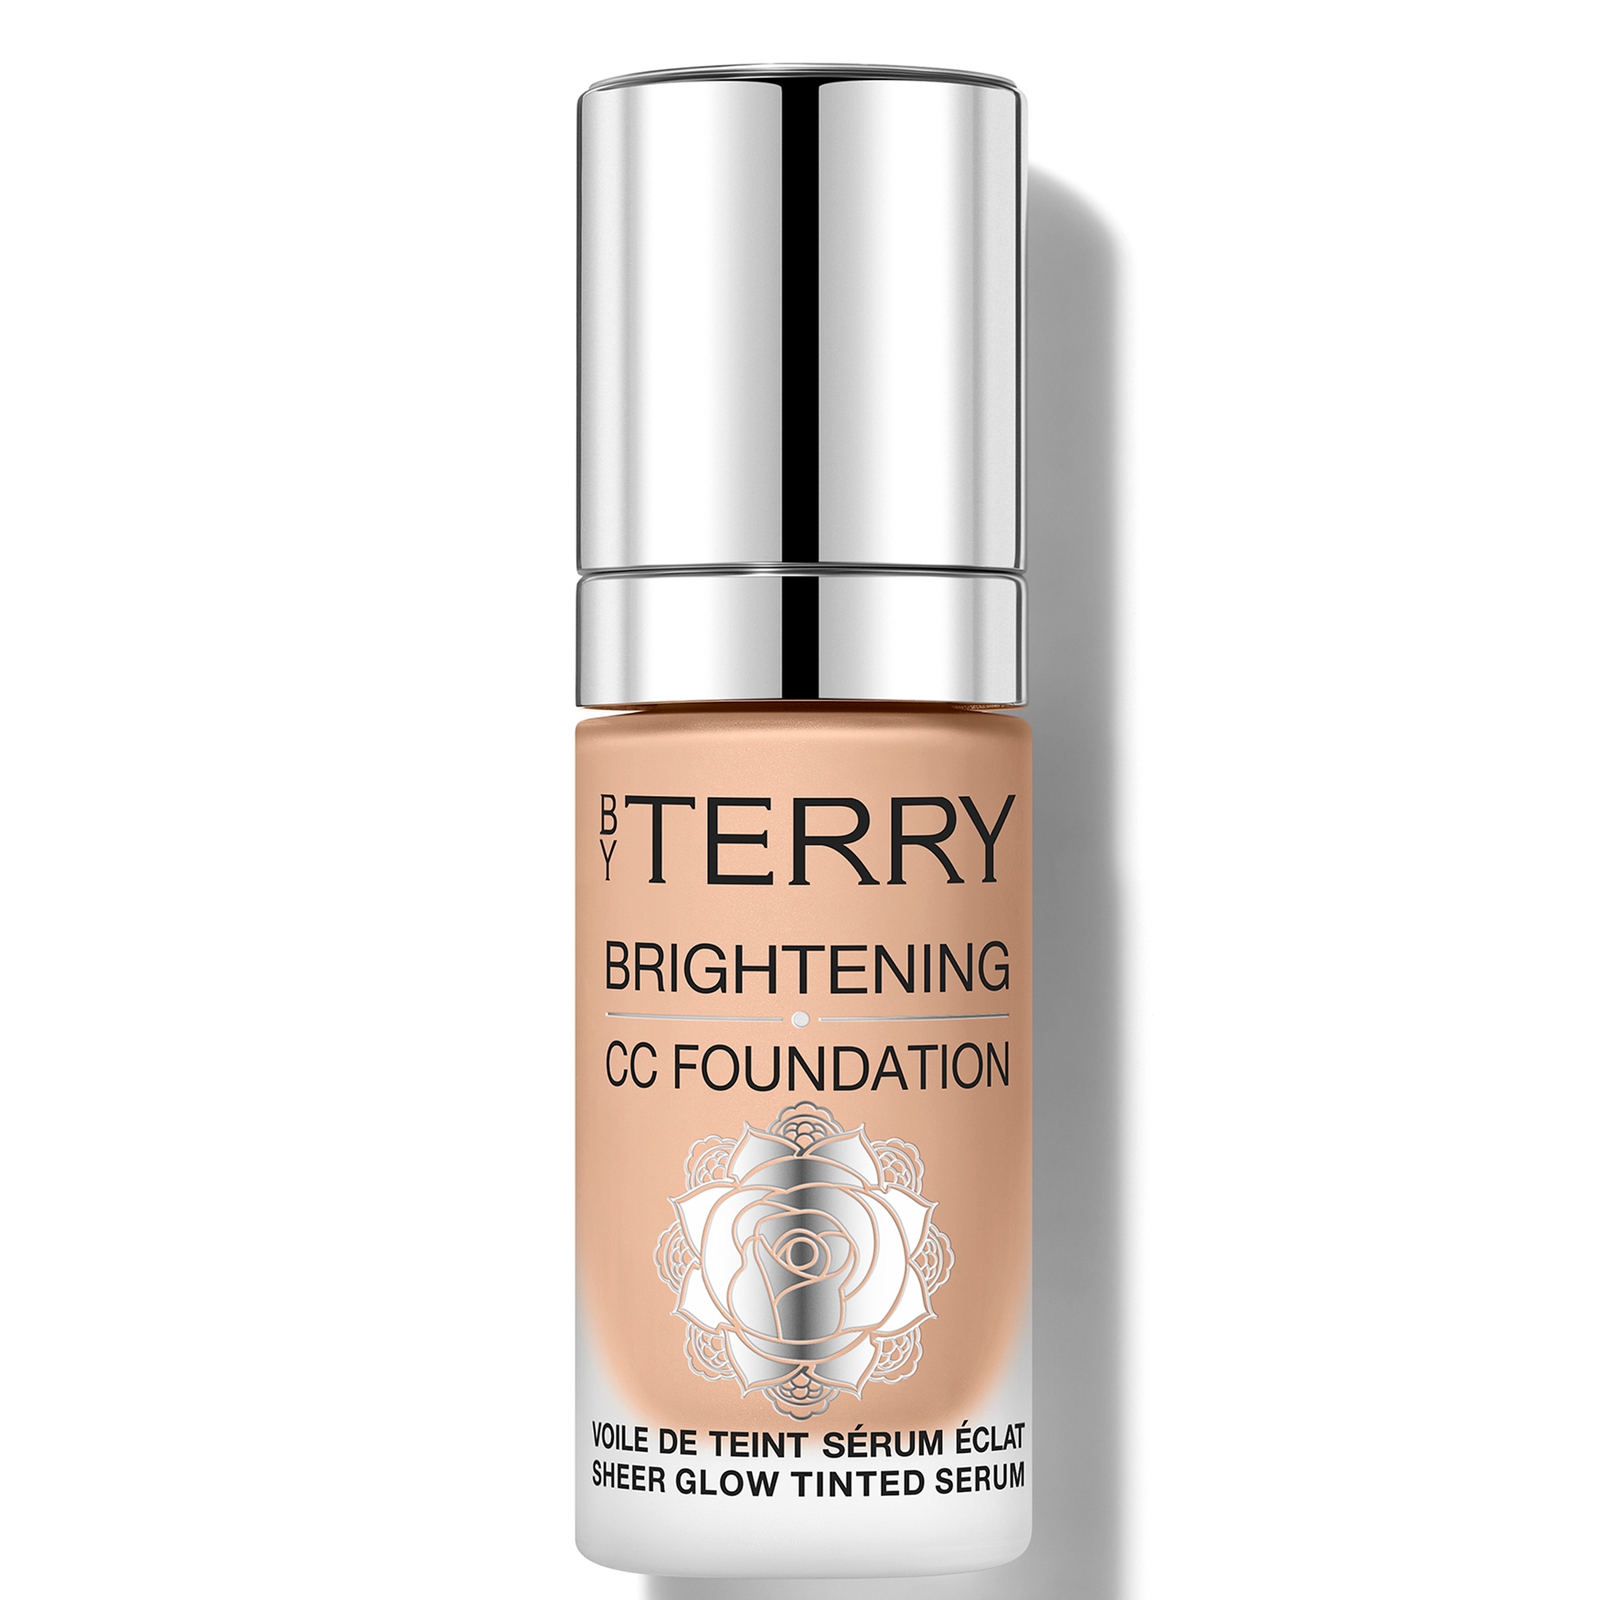 By Terry Brightening Cc Foundation 30ml (various Shades) - 4c - Medium Cool In White